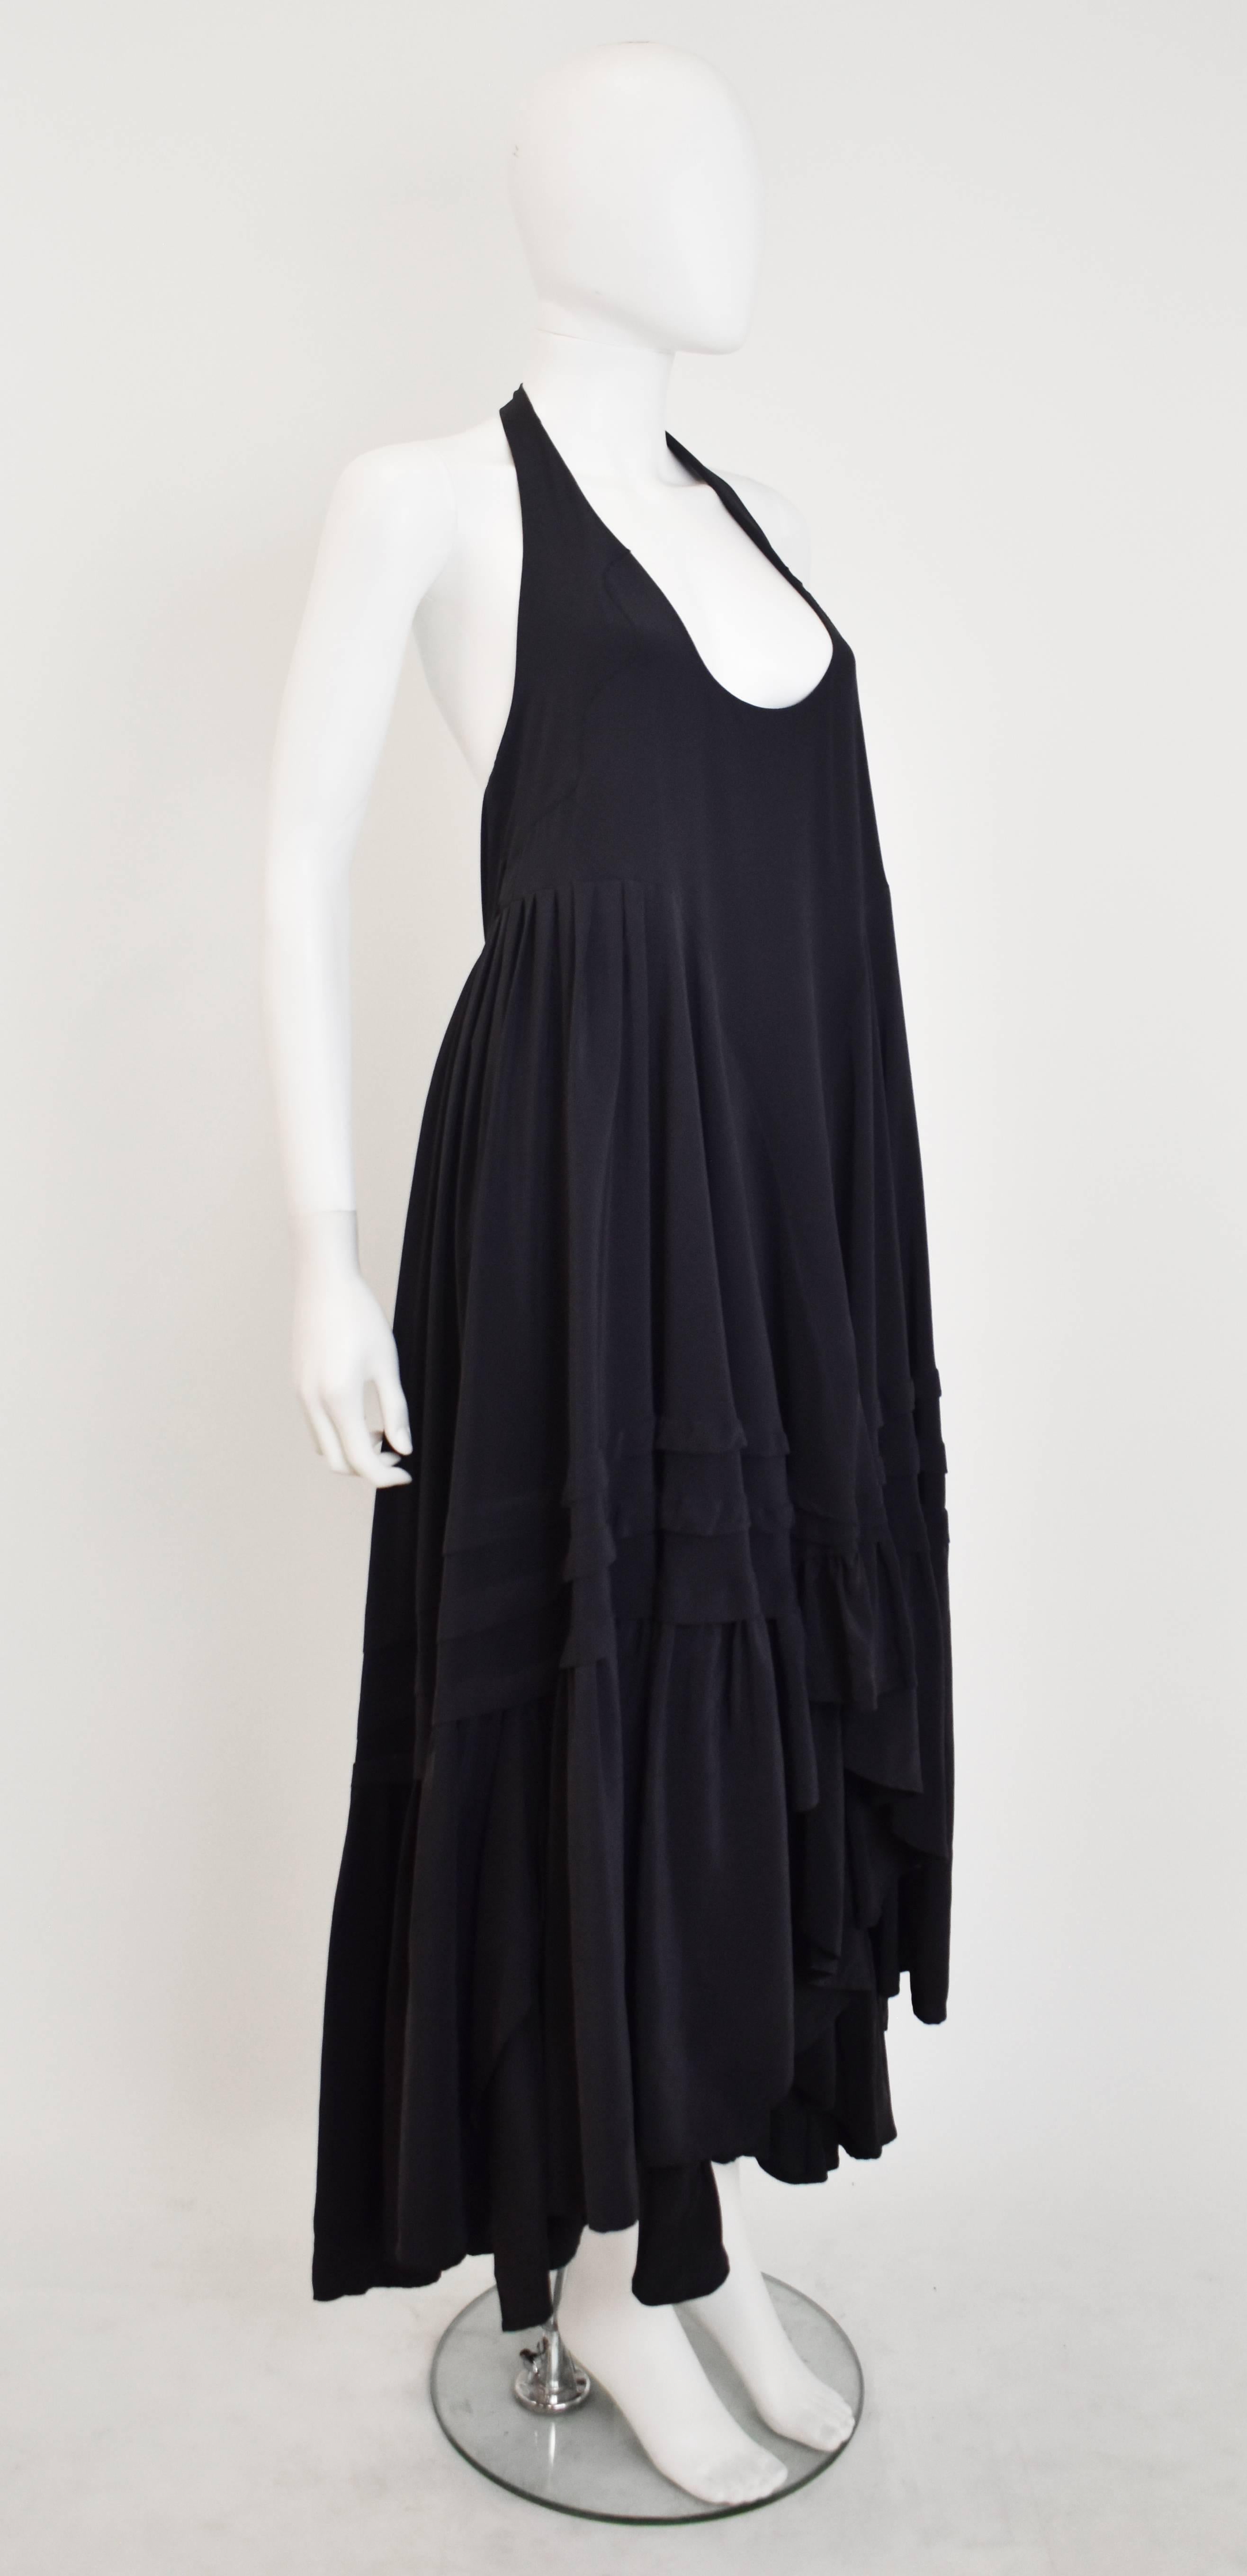 A beautiful halter neck dress from Balenciaga’s Silk label. The dress has a sleeveless, halter neck design with an elegant shape that trapezes out from under the bust. The skirt is full with ruffles that are shorter at the front and longer at the